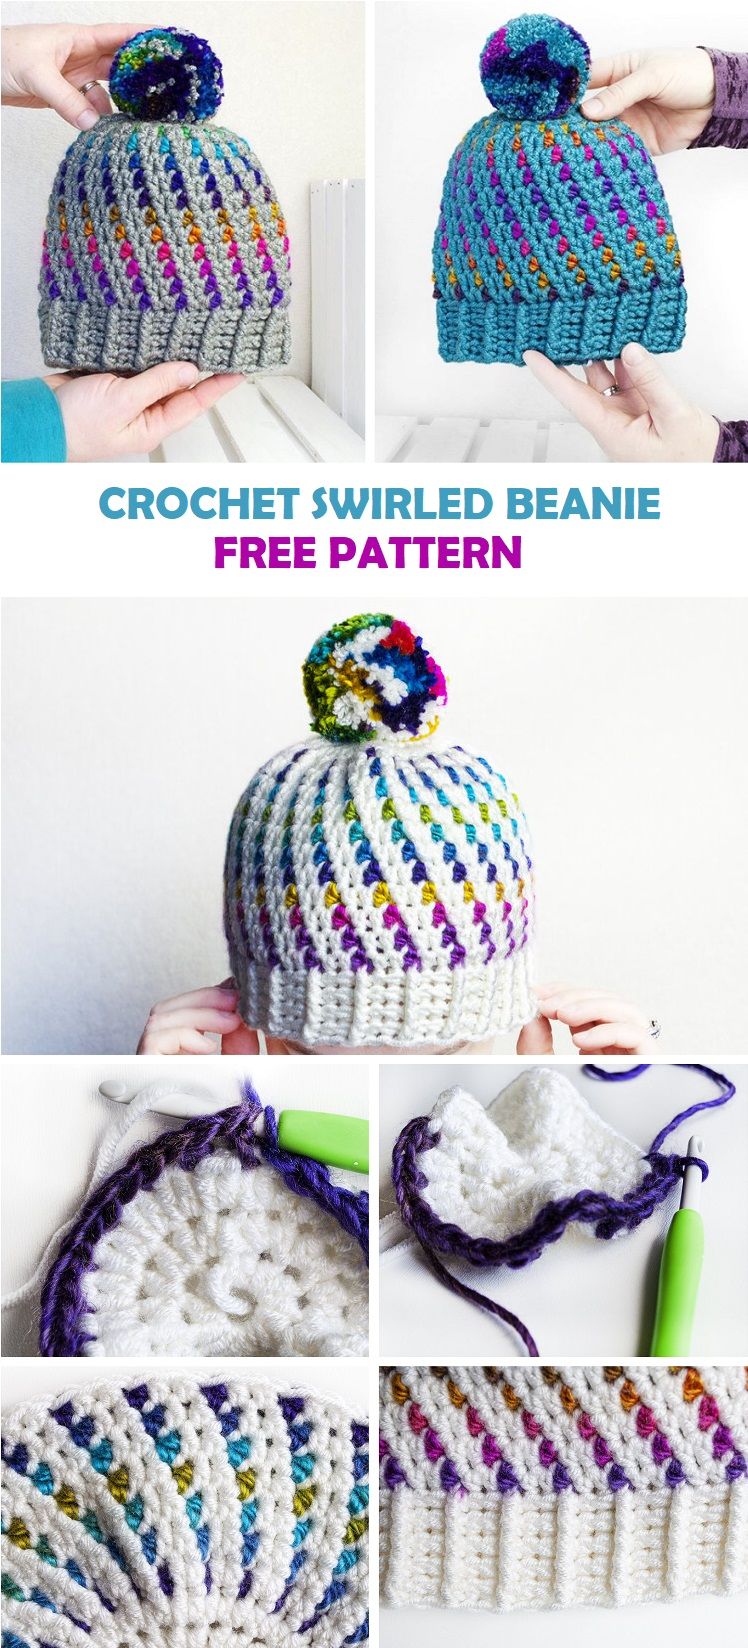 r free or purchase a PDF pattern from the blog. Learn how to crochet a beautiful swirled hat.